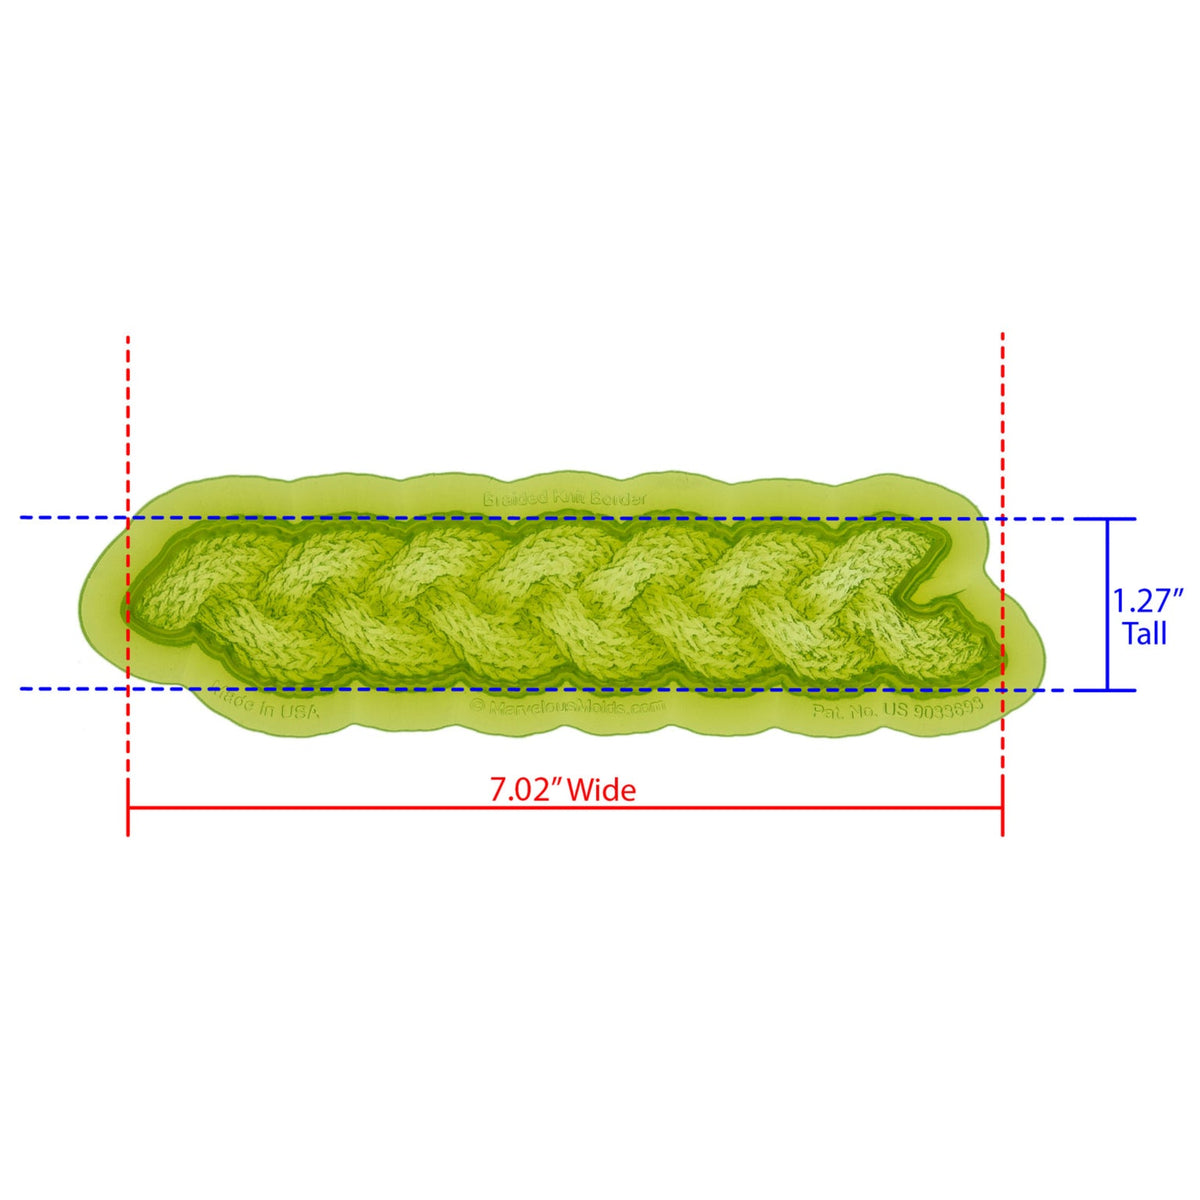 Braided Knit Border Silicone Mold Cavity measures 1.27 inches tall by 7.02 inches wise, proudly made in USA